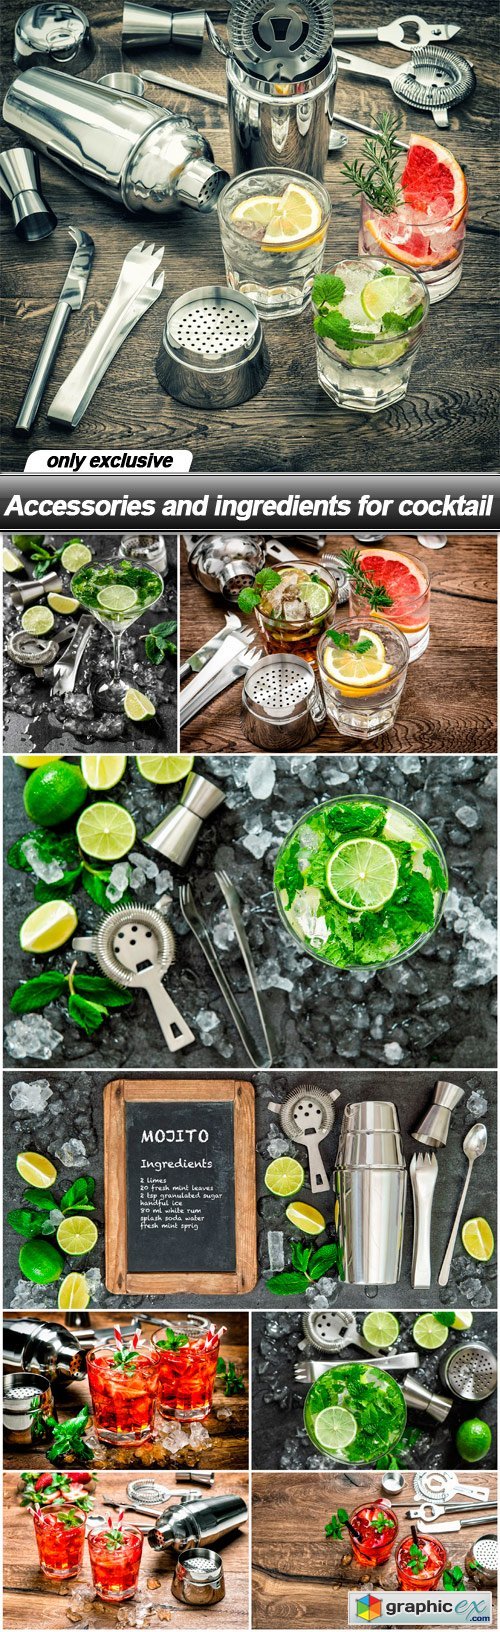 Accessories and ingredients for cocktail - 9 UHQ JPEG